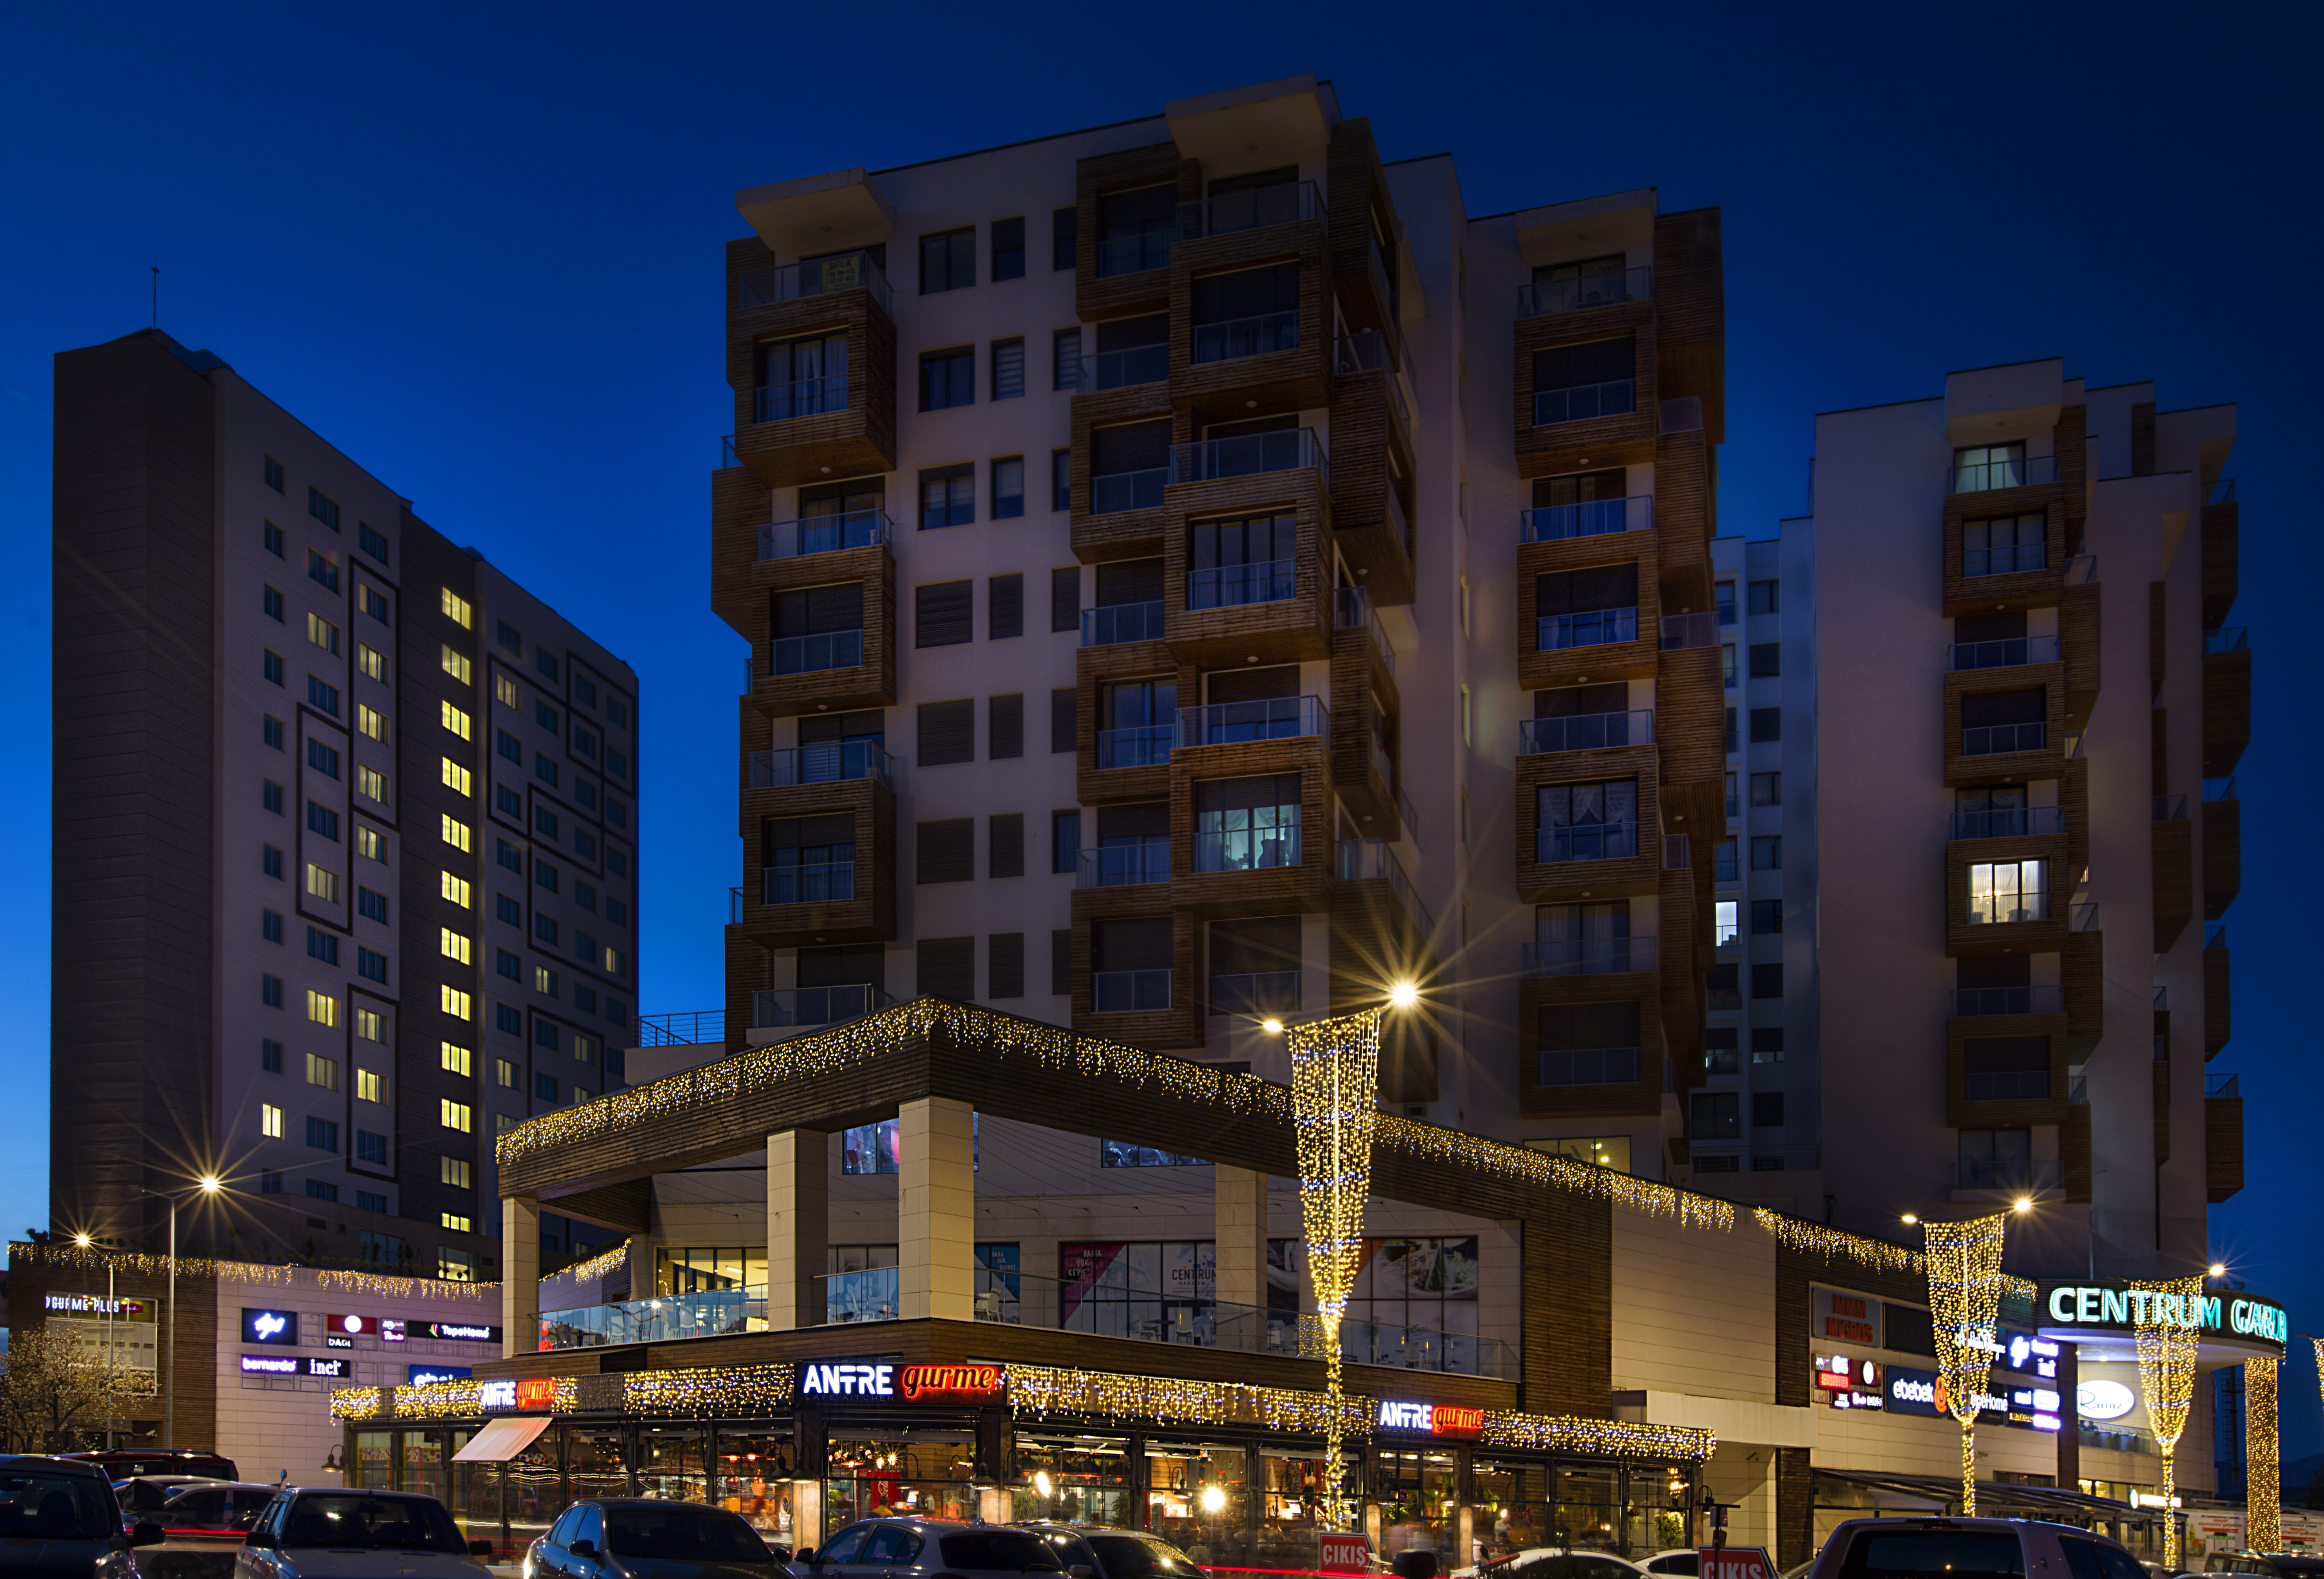 Hotel Exterior and Adjacent Businesses at Night